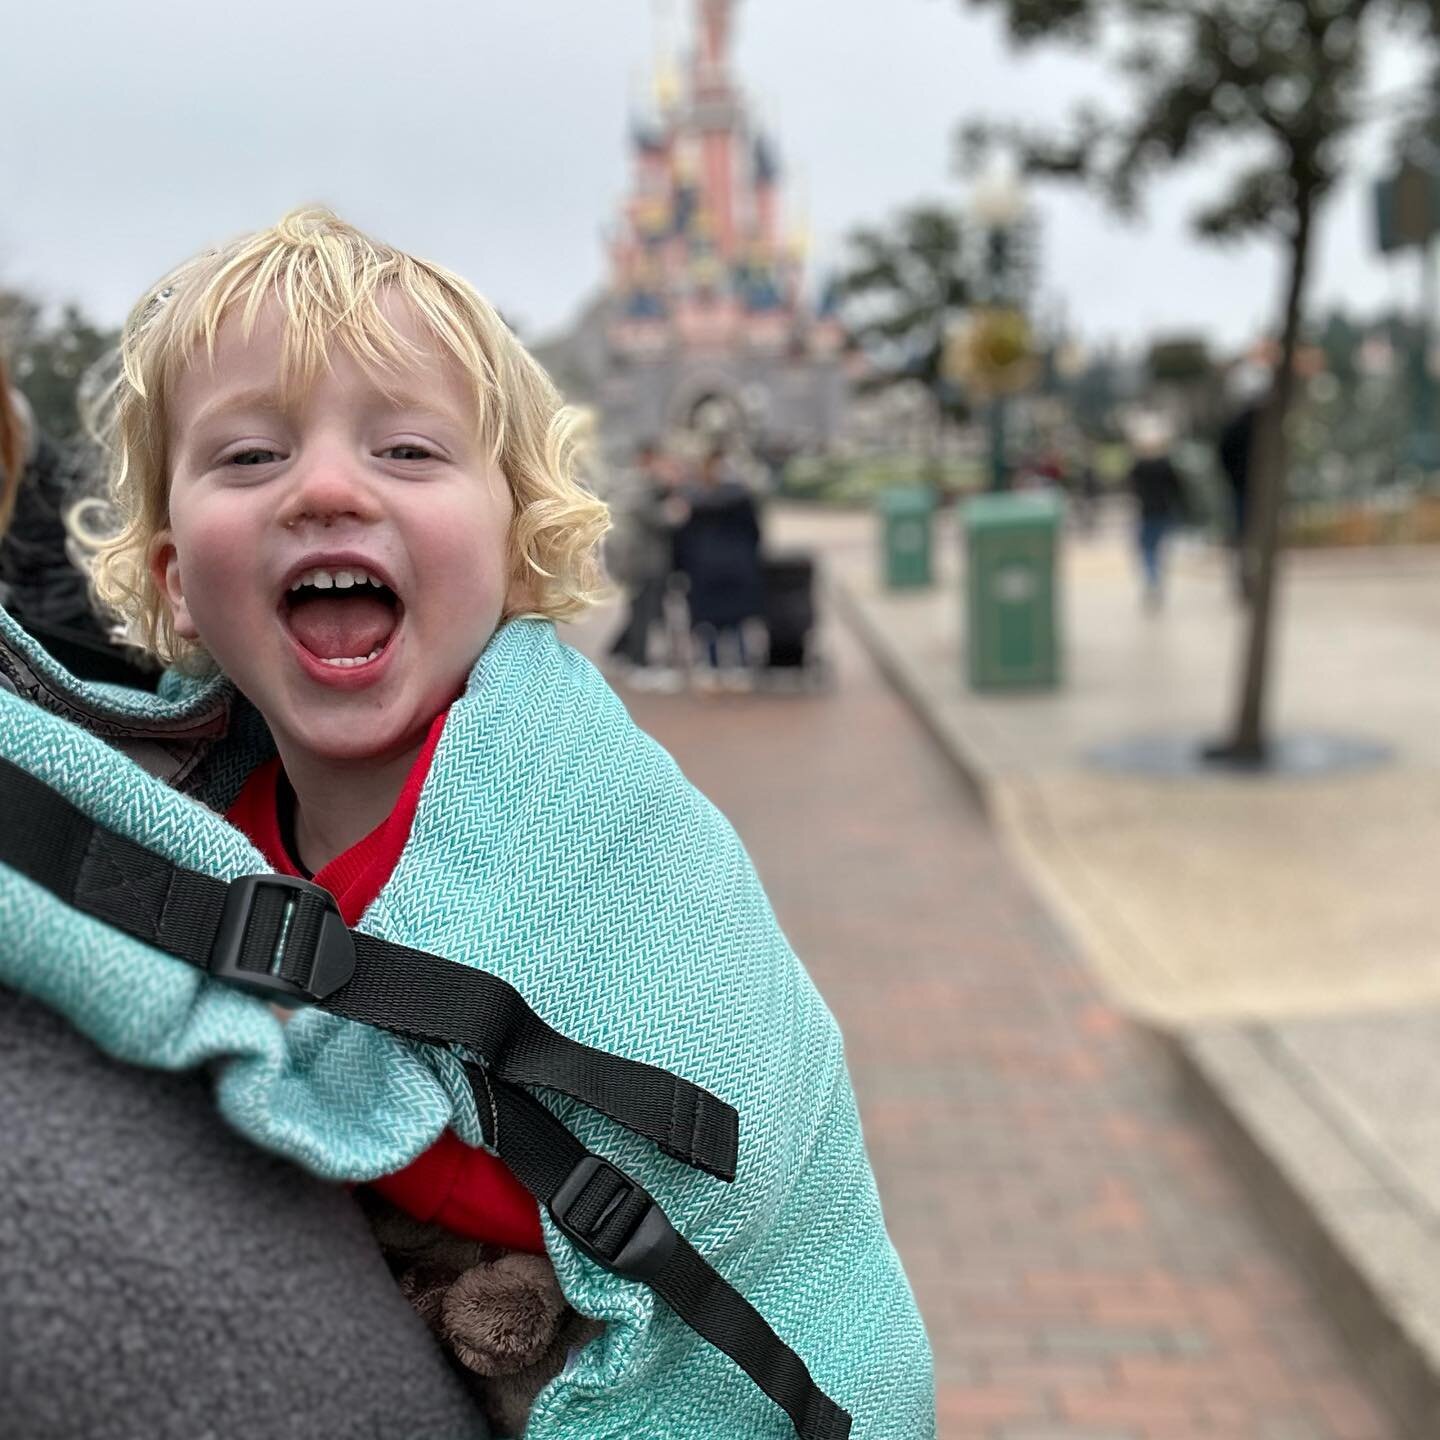 (Slightly snotty) toddler carrying at&hellip; prizes if you can work out the location! (Not a real prize, just the satisfaction of being right!!) 

#lennylamb #toddlercarrier #toddlersling #carryallthetoddlers #toddlercarrying